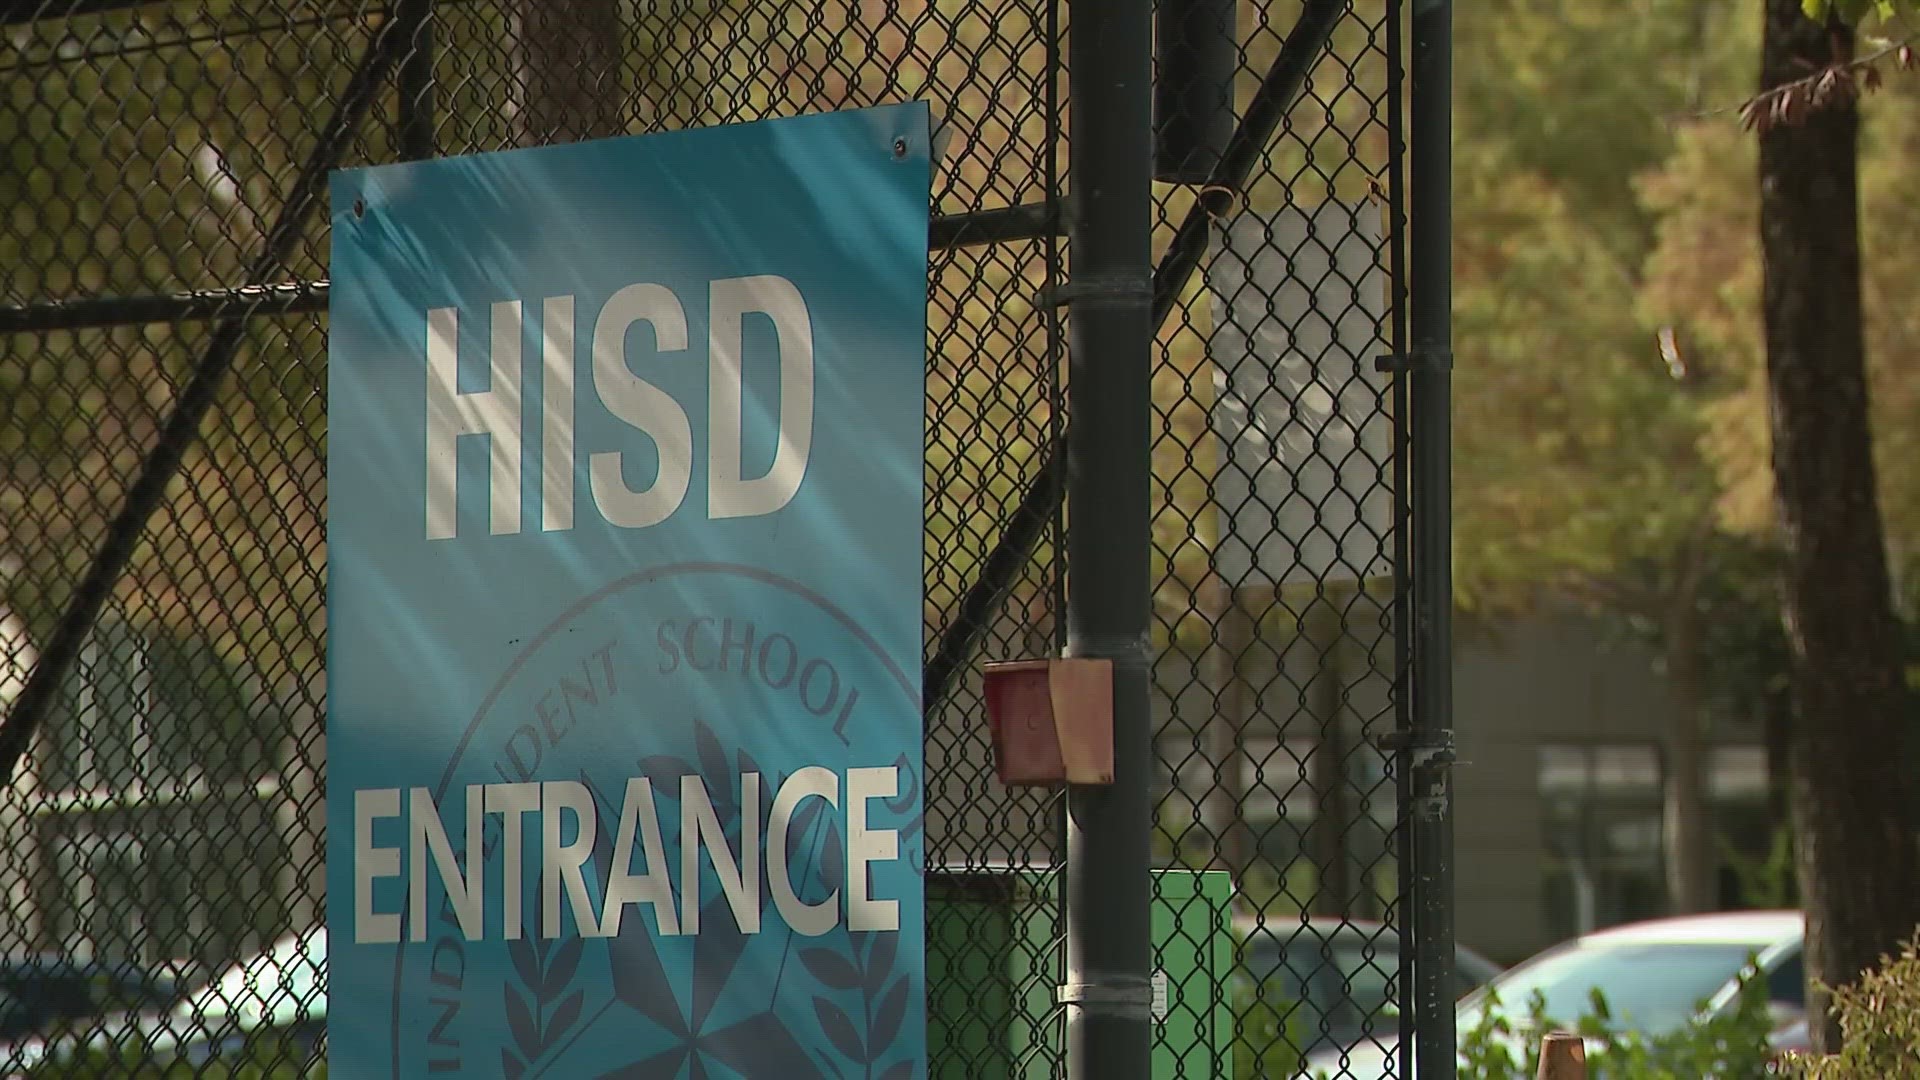 Some of the changes the district put into place this year are causing teachers to feel stressed out.